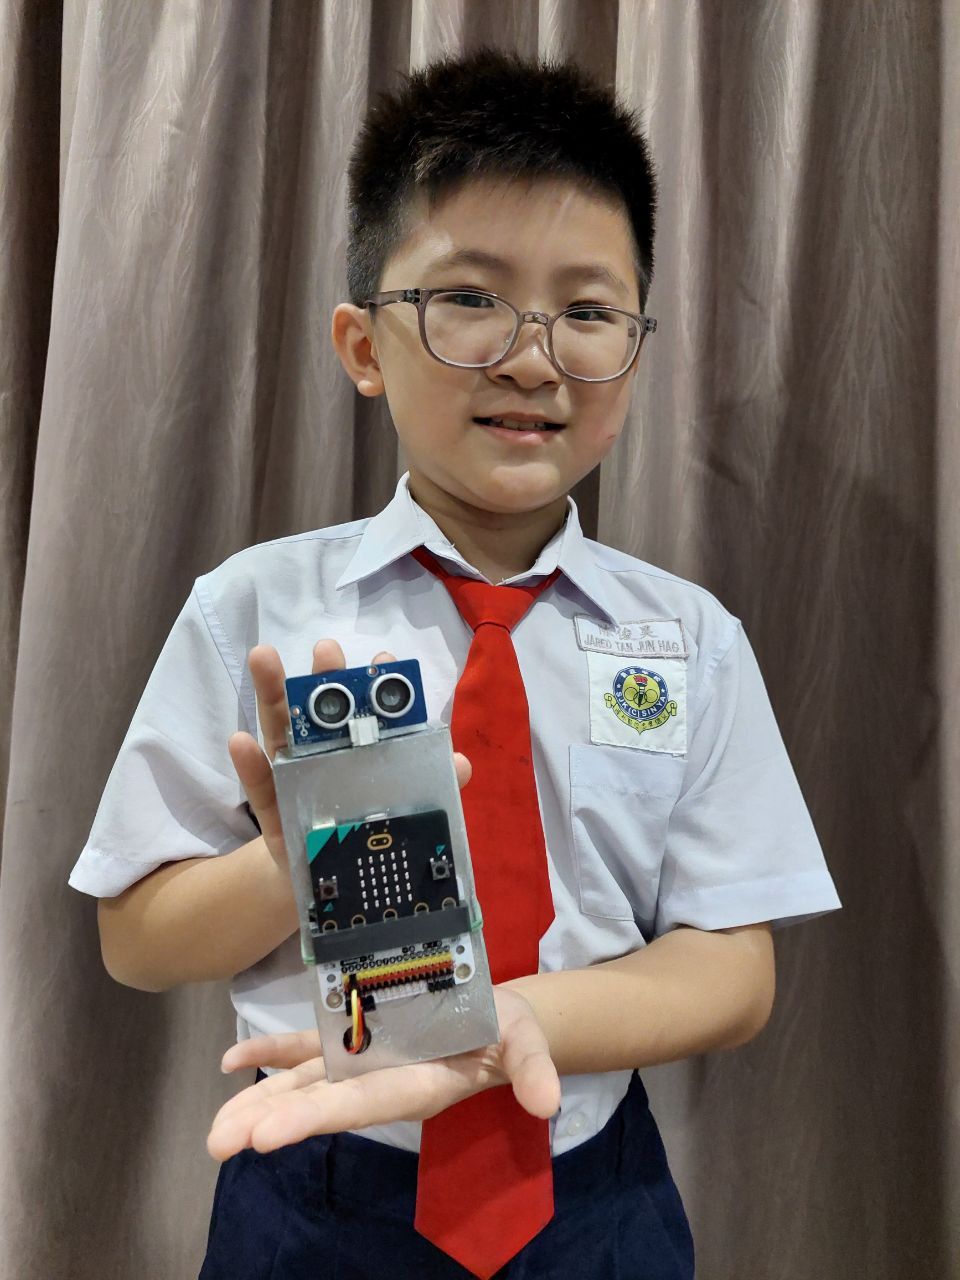 Jared holding his micro:bit creation. The 'E-mom' device. 